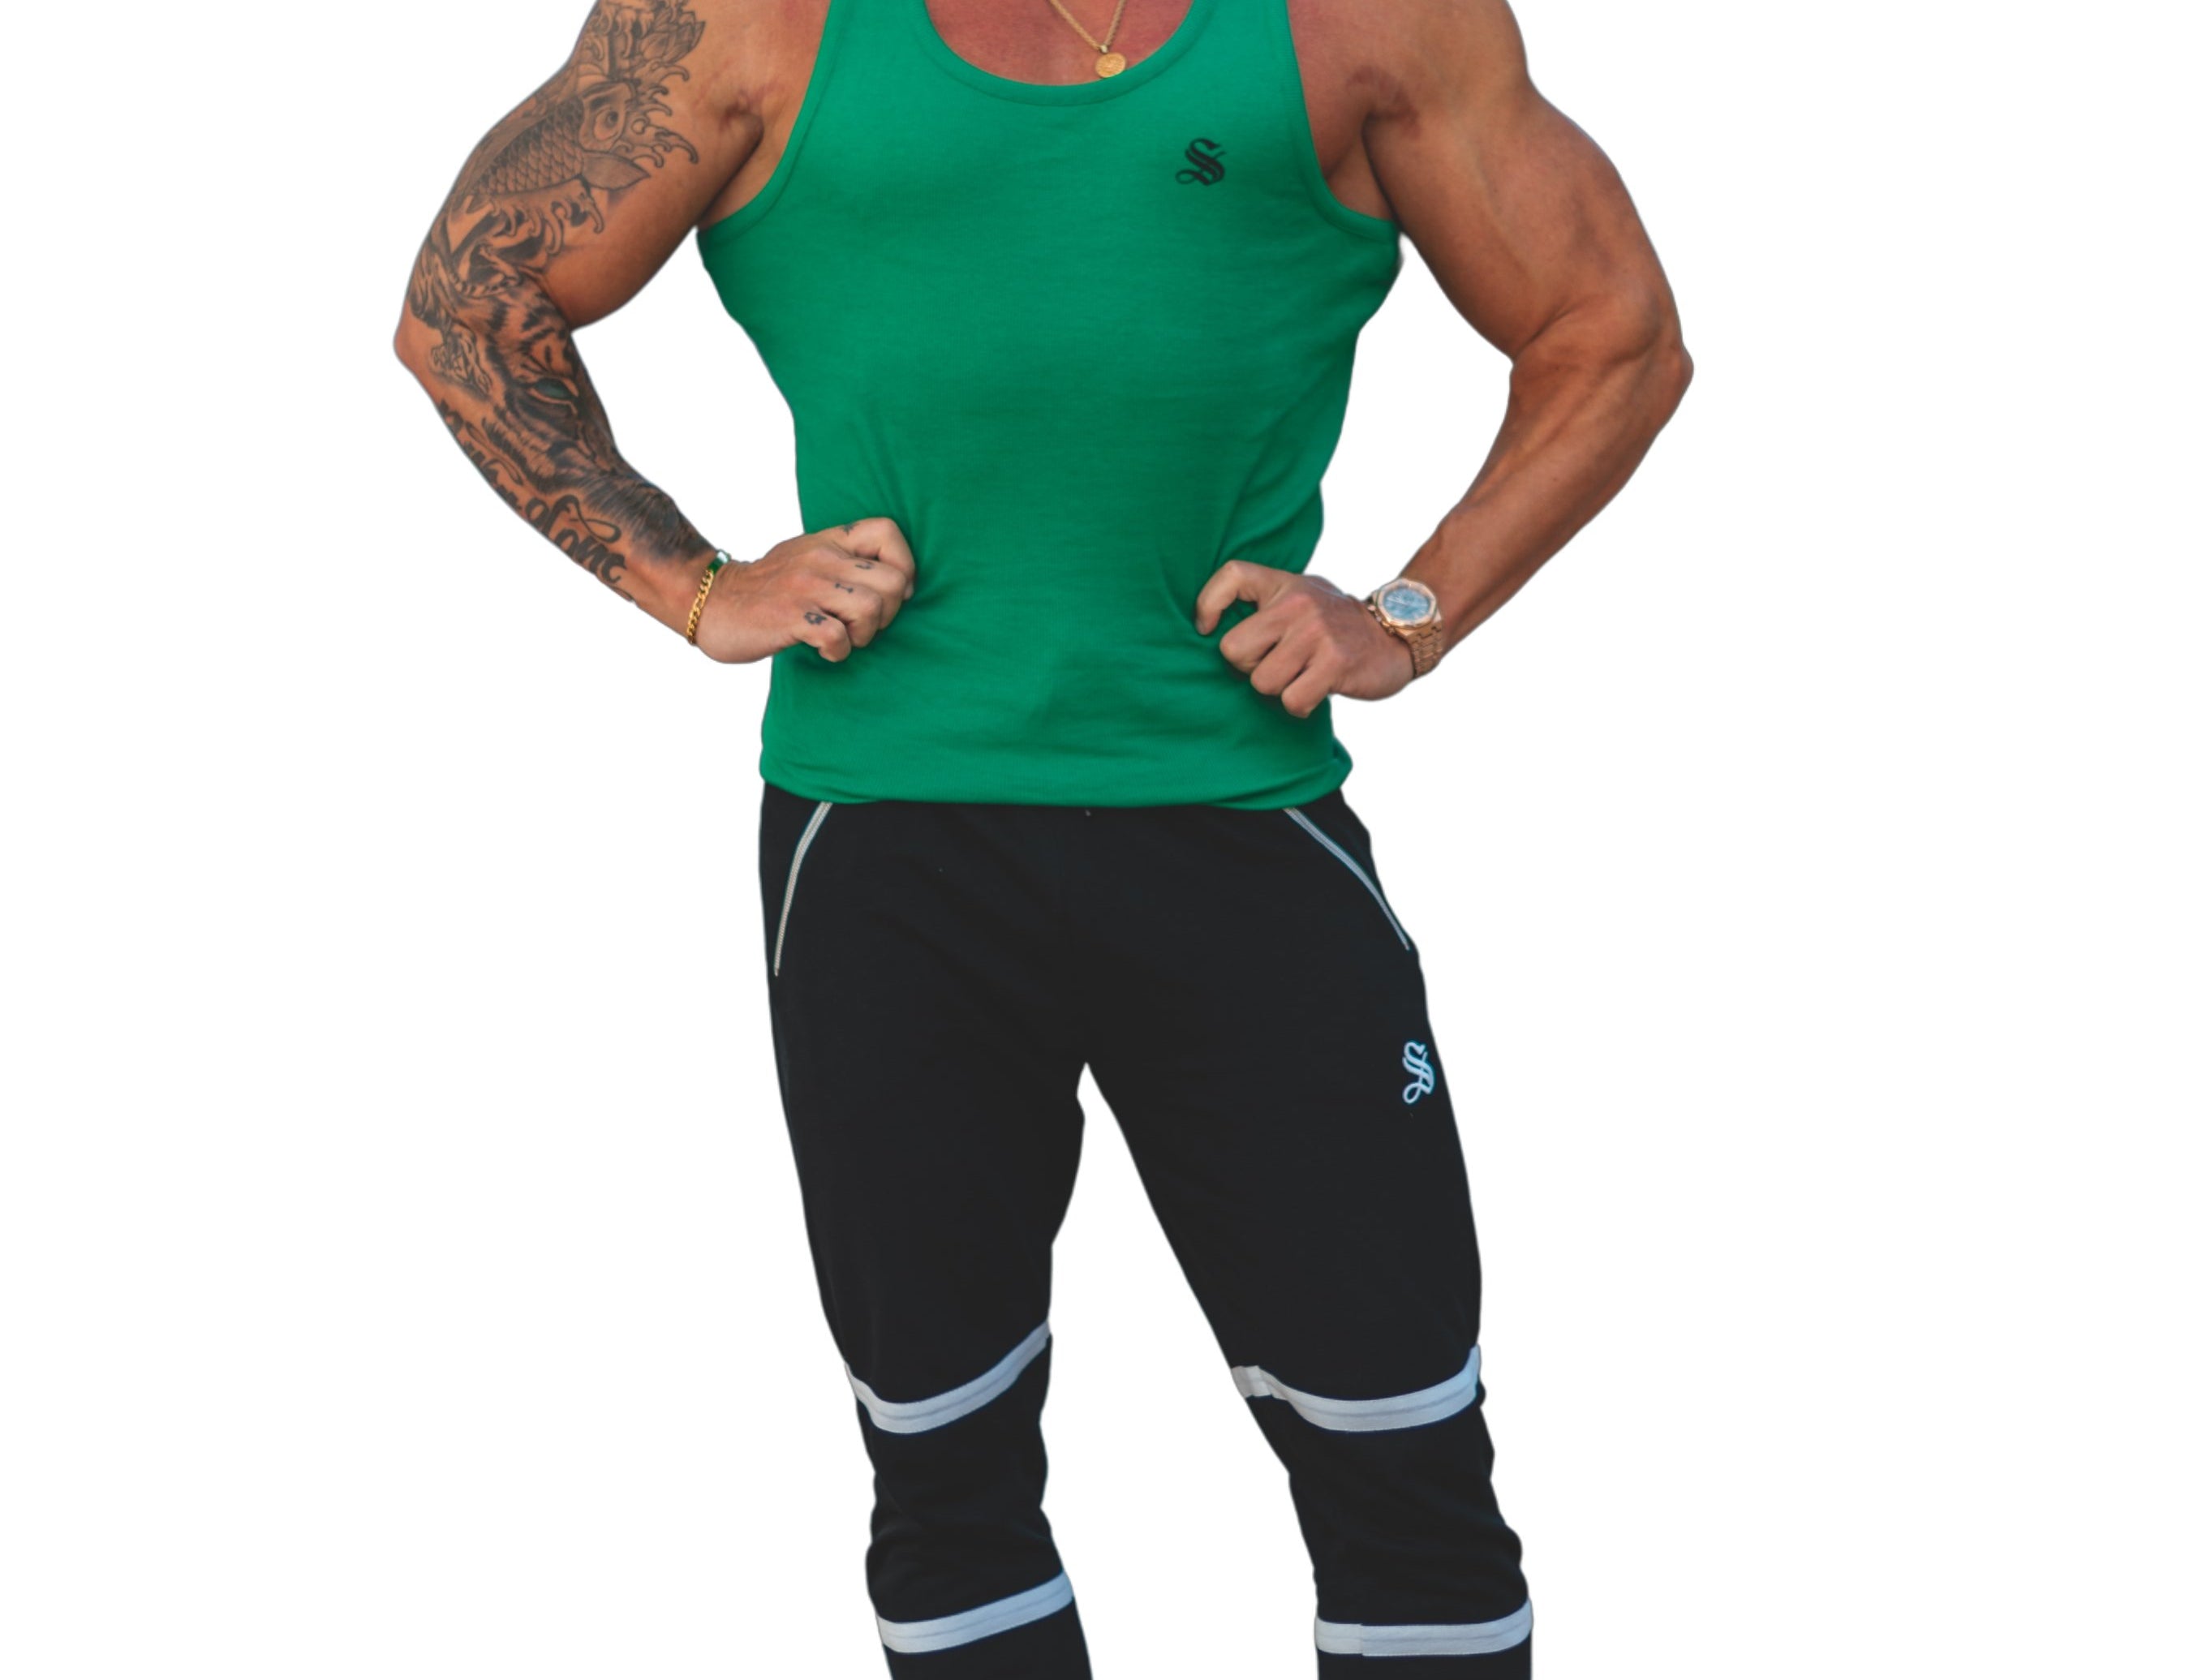 Landrow- Green Tank Top for Men - Sarman Fashion - Wholesale Clothing Fashion Brand for Men from Canada